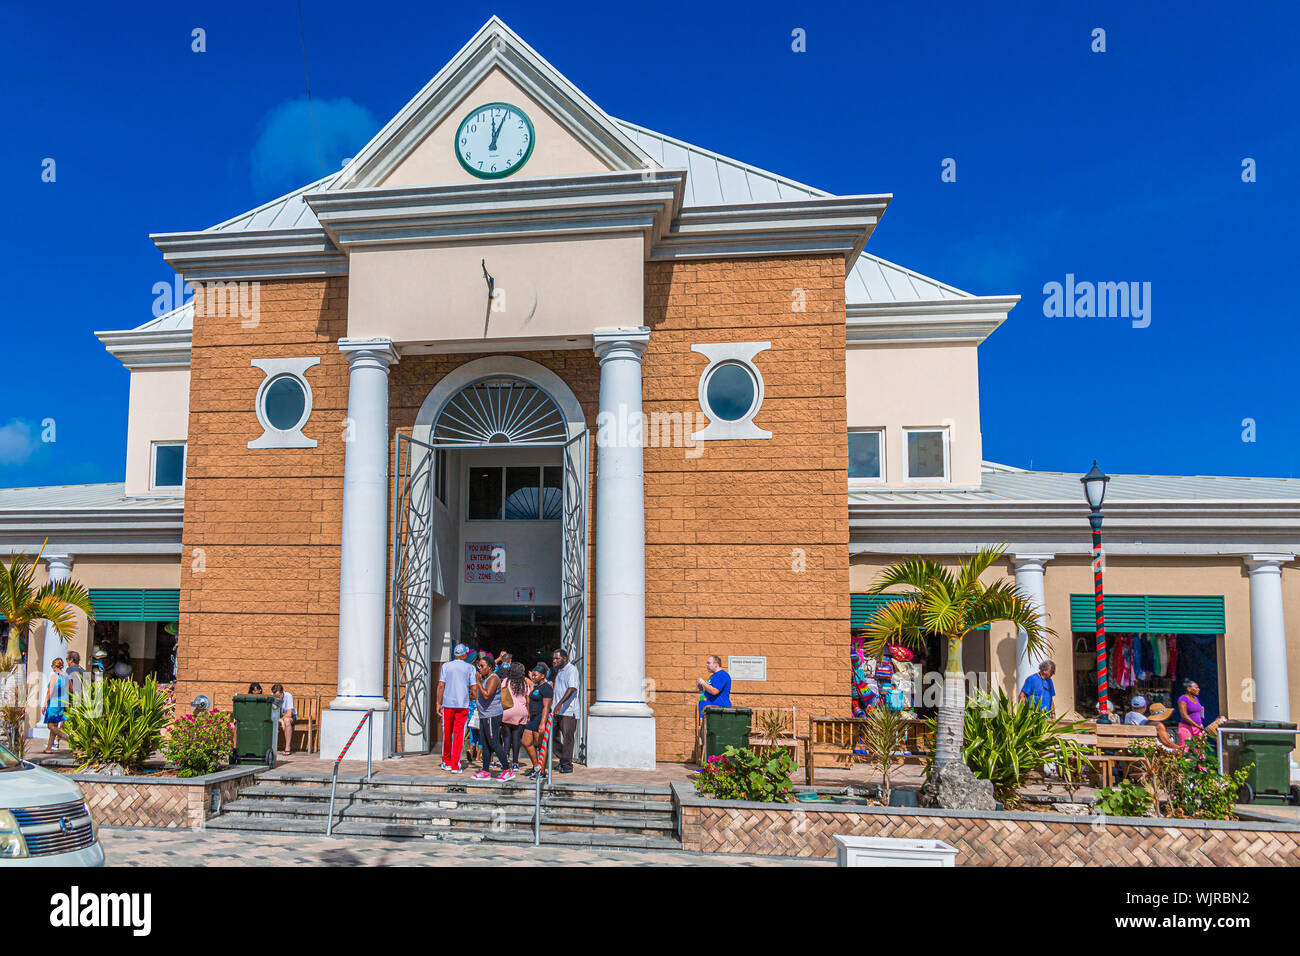 NASSAU, BAHAMAS - September 2, 2019: Nassau and the Bahamas was pounded by endless rain and 185 mph winds from Category 5 Dorian, which stayed station Stock Photo